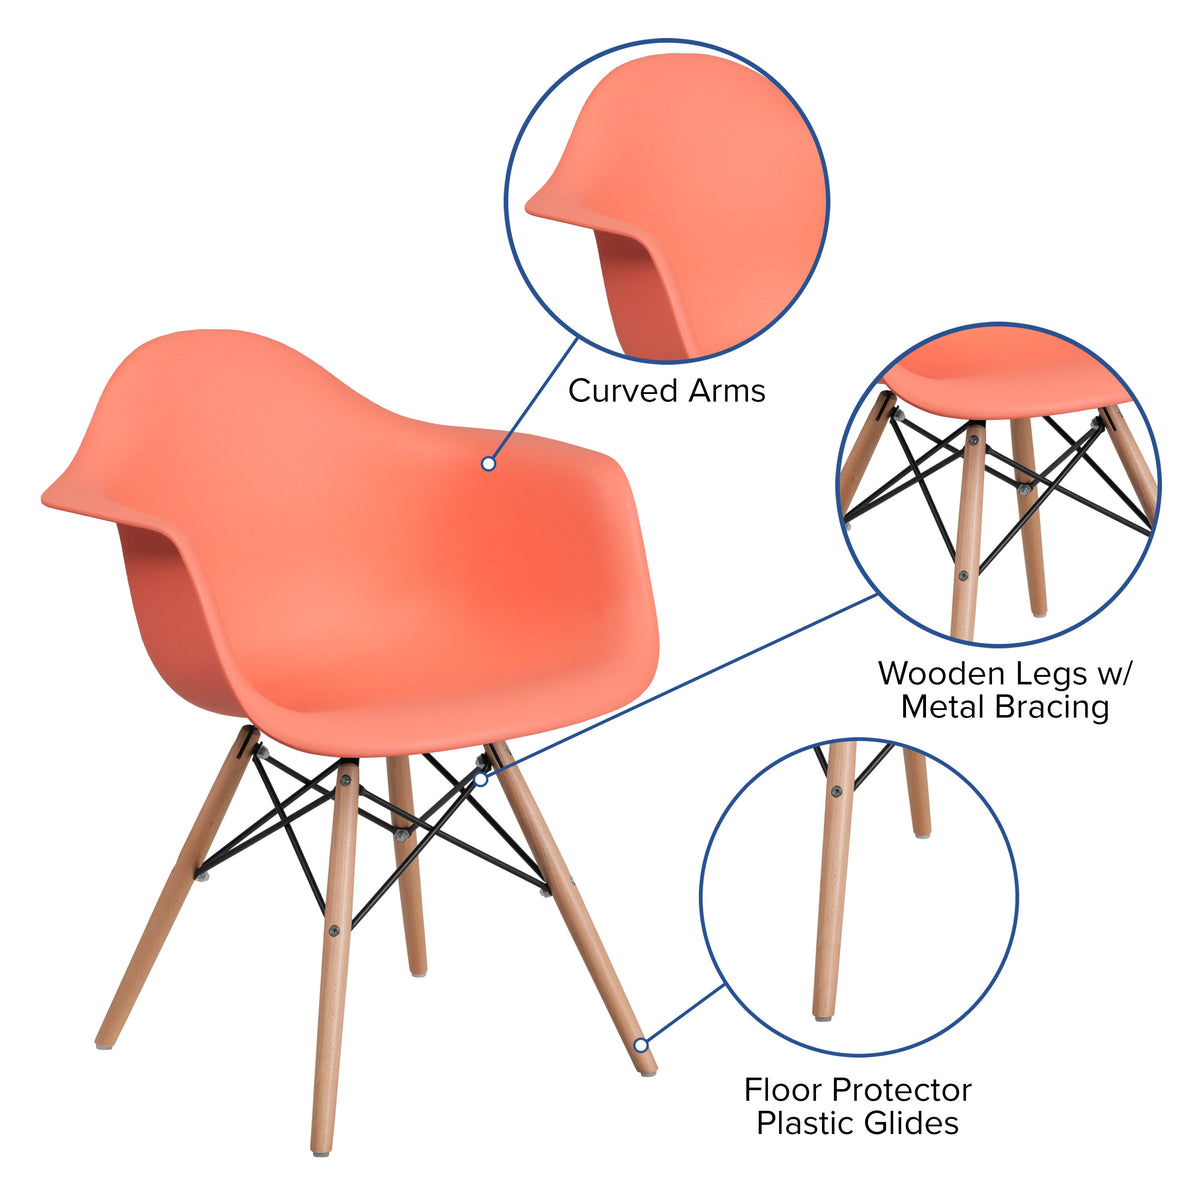 Peach |#| Peach Plastic Chair with Arms and Wooden Legs - Accent & Side Chair